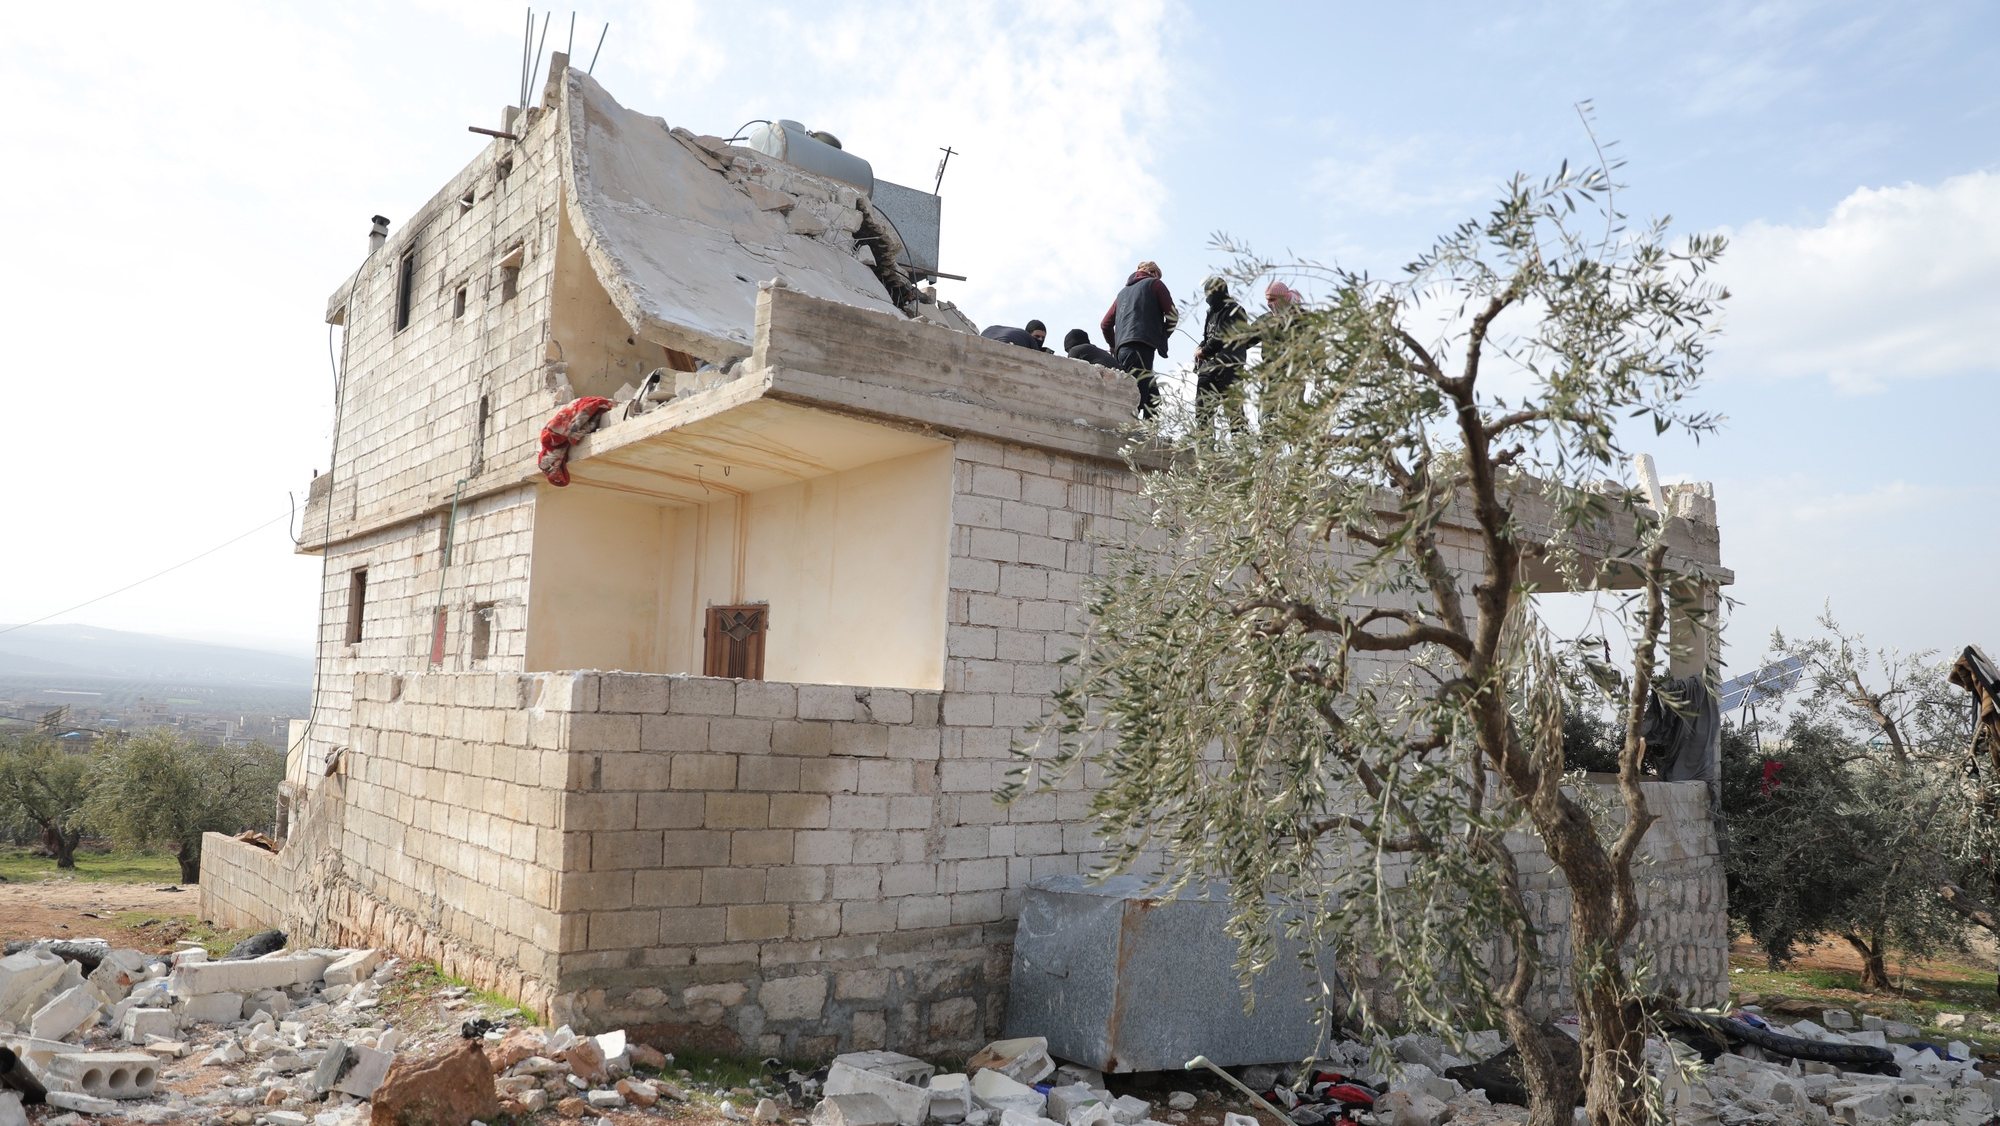 epa09724947 A damaged house is seen after an alleged counterterrorism operation by US Special forces in the early morning in Atma village in the northern countryside of Idlib, Syria, 03 February 2022. President Joe Biden said on 03 February that a U.S. raid in Syria killed Abu Ibrahim al-Hashimi al-Qurayshi - the leader of ISIS. The Britain-based Syrian Observatory for Human Rights reported that there were &#039;confirmed reports of fatalities&#039;, but did not provide numbers or identities.  EPA/YAHYA NEMAH